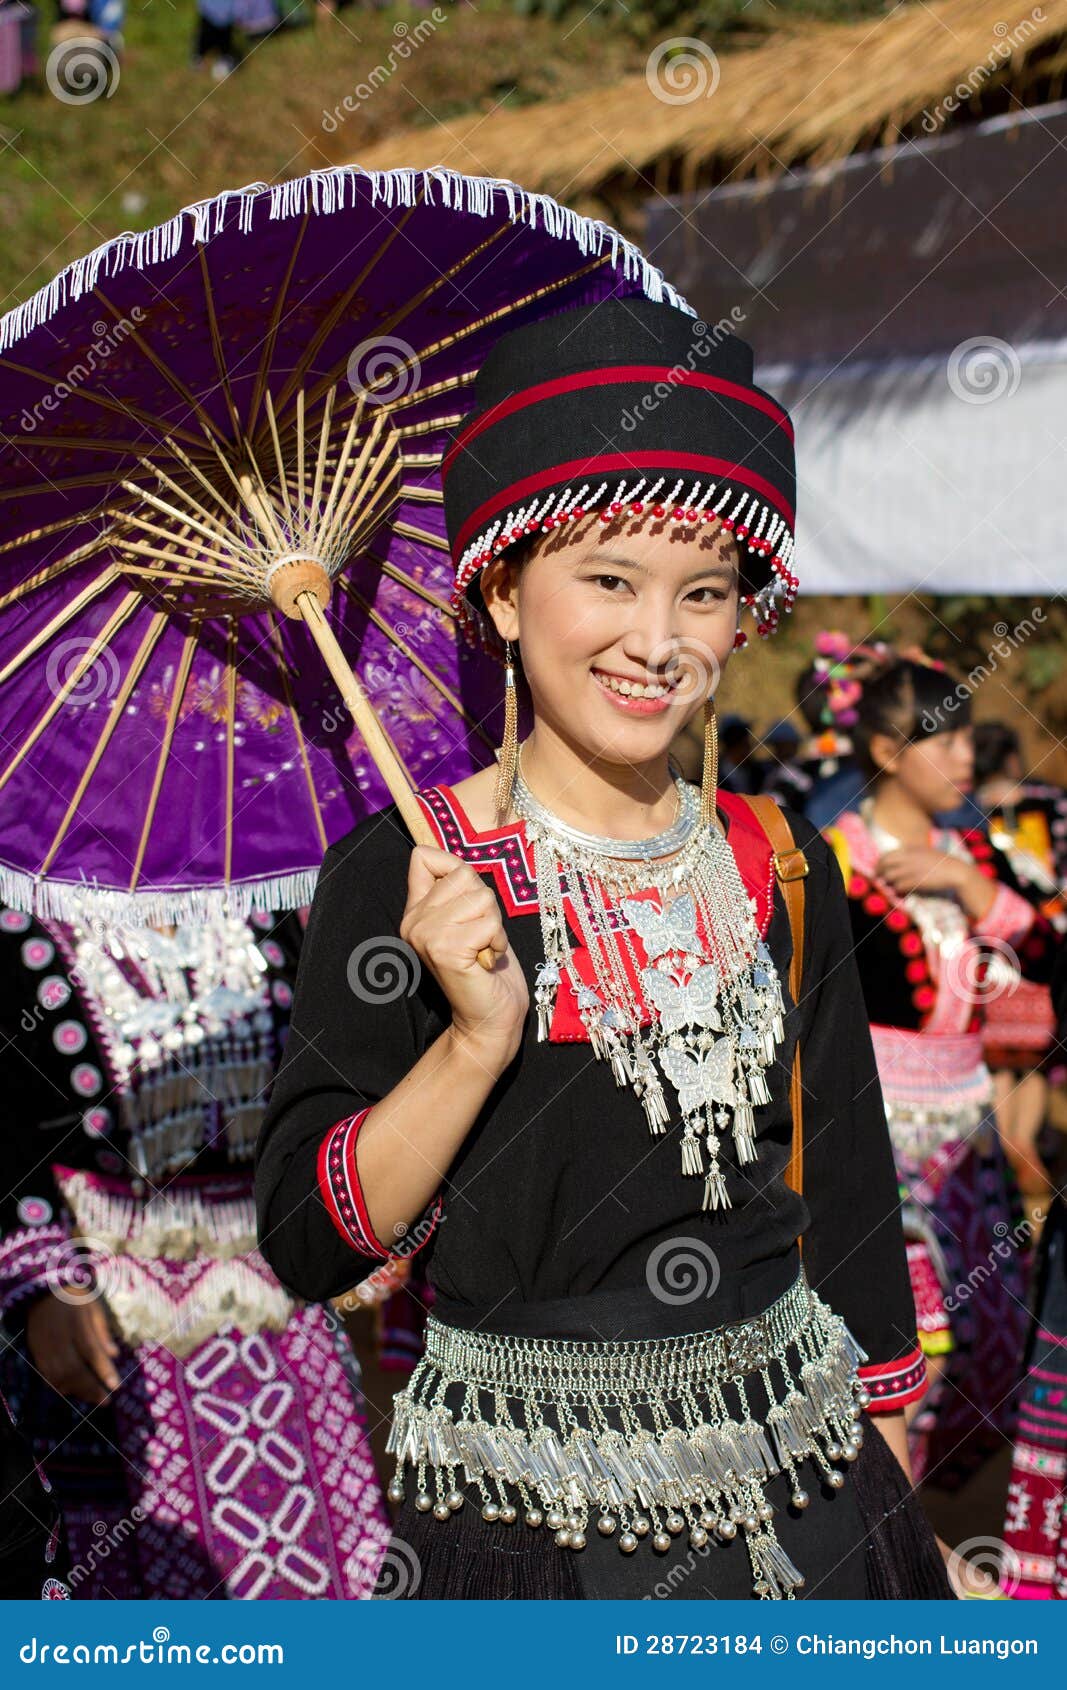 Hmong hill tribe woman. editorial stock image. Image of headdress